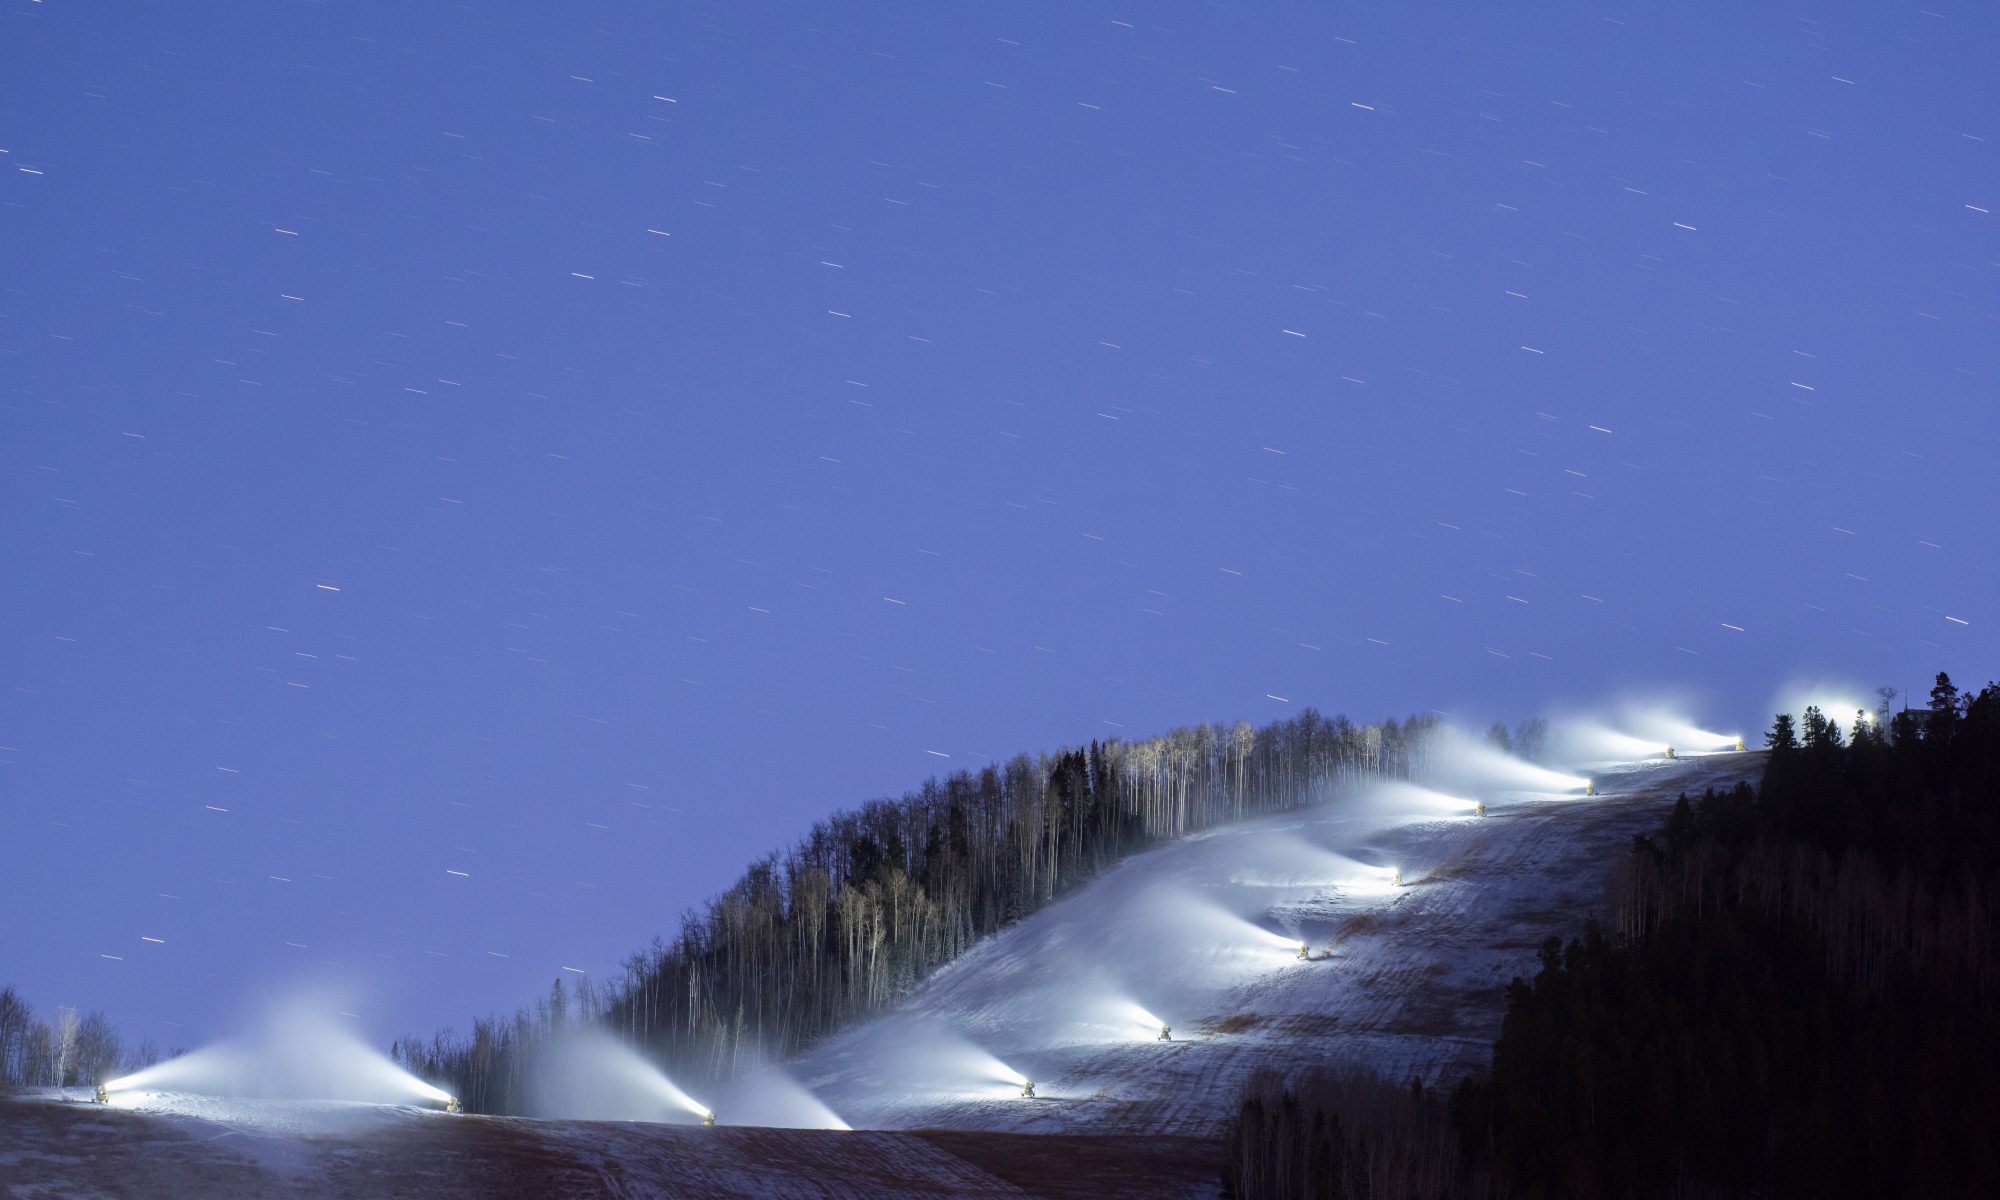 Snowmaking. Photo: Aspen Skiing Company. ASPEN SKIING COMPANY RELEASES 2018 SUSTAINABILITY REPORT In the style of Stan Lee.